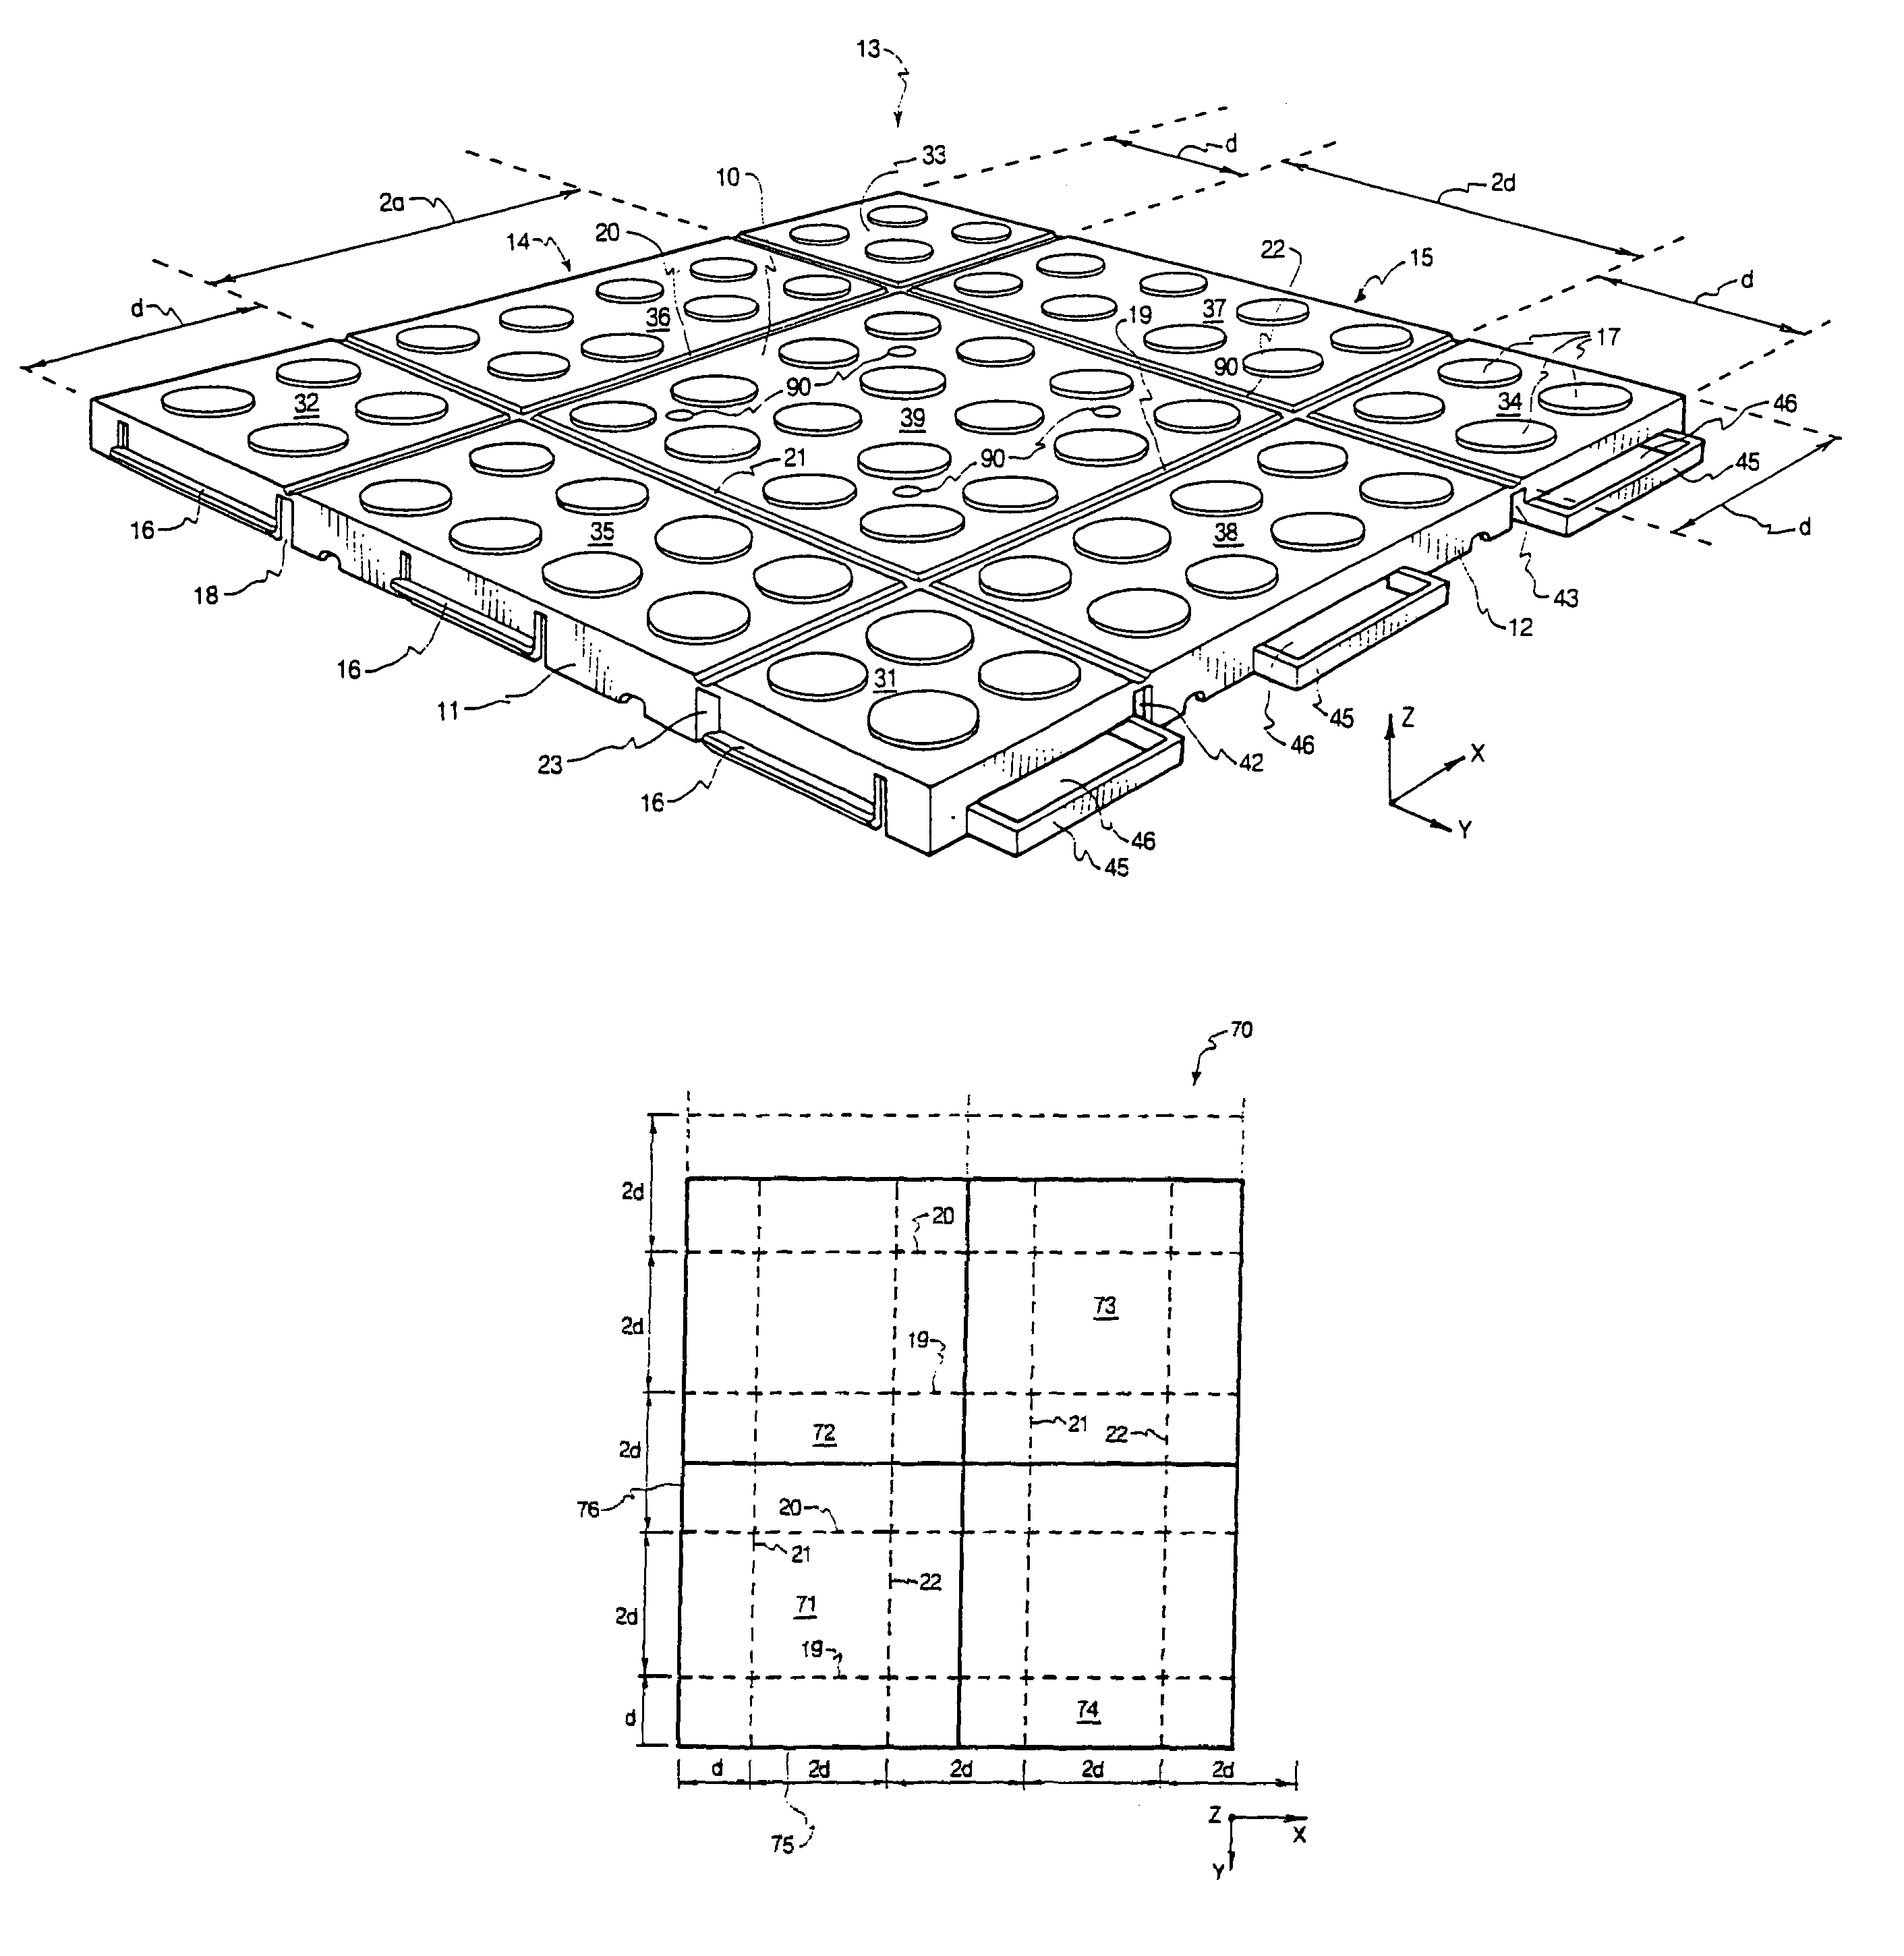 Roll-up floor tile system and method